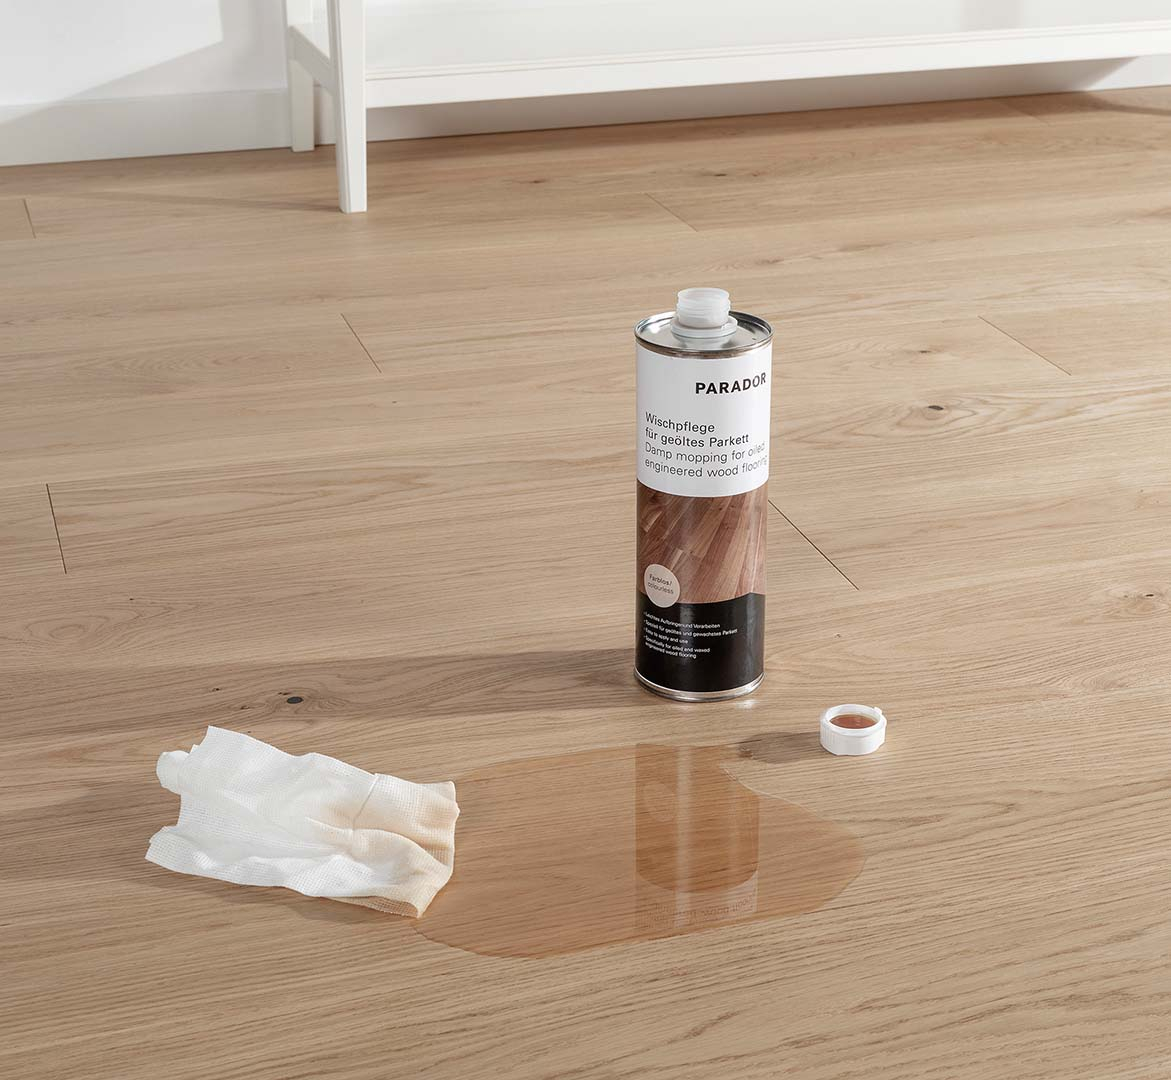 Damp mopping for oiled engineered wood flooring
 